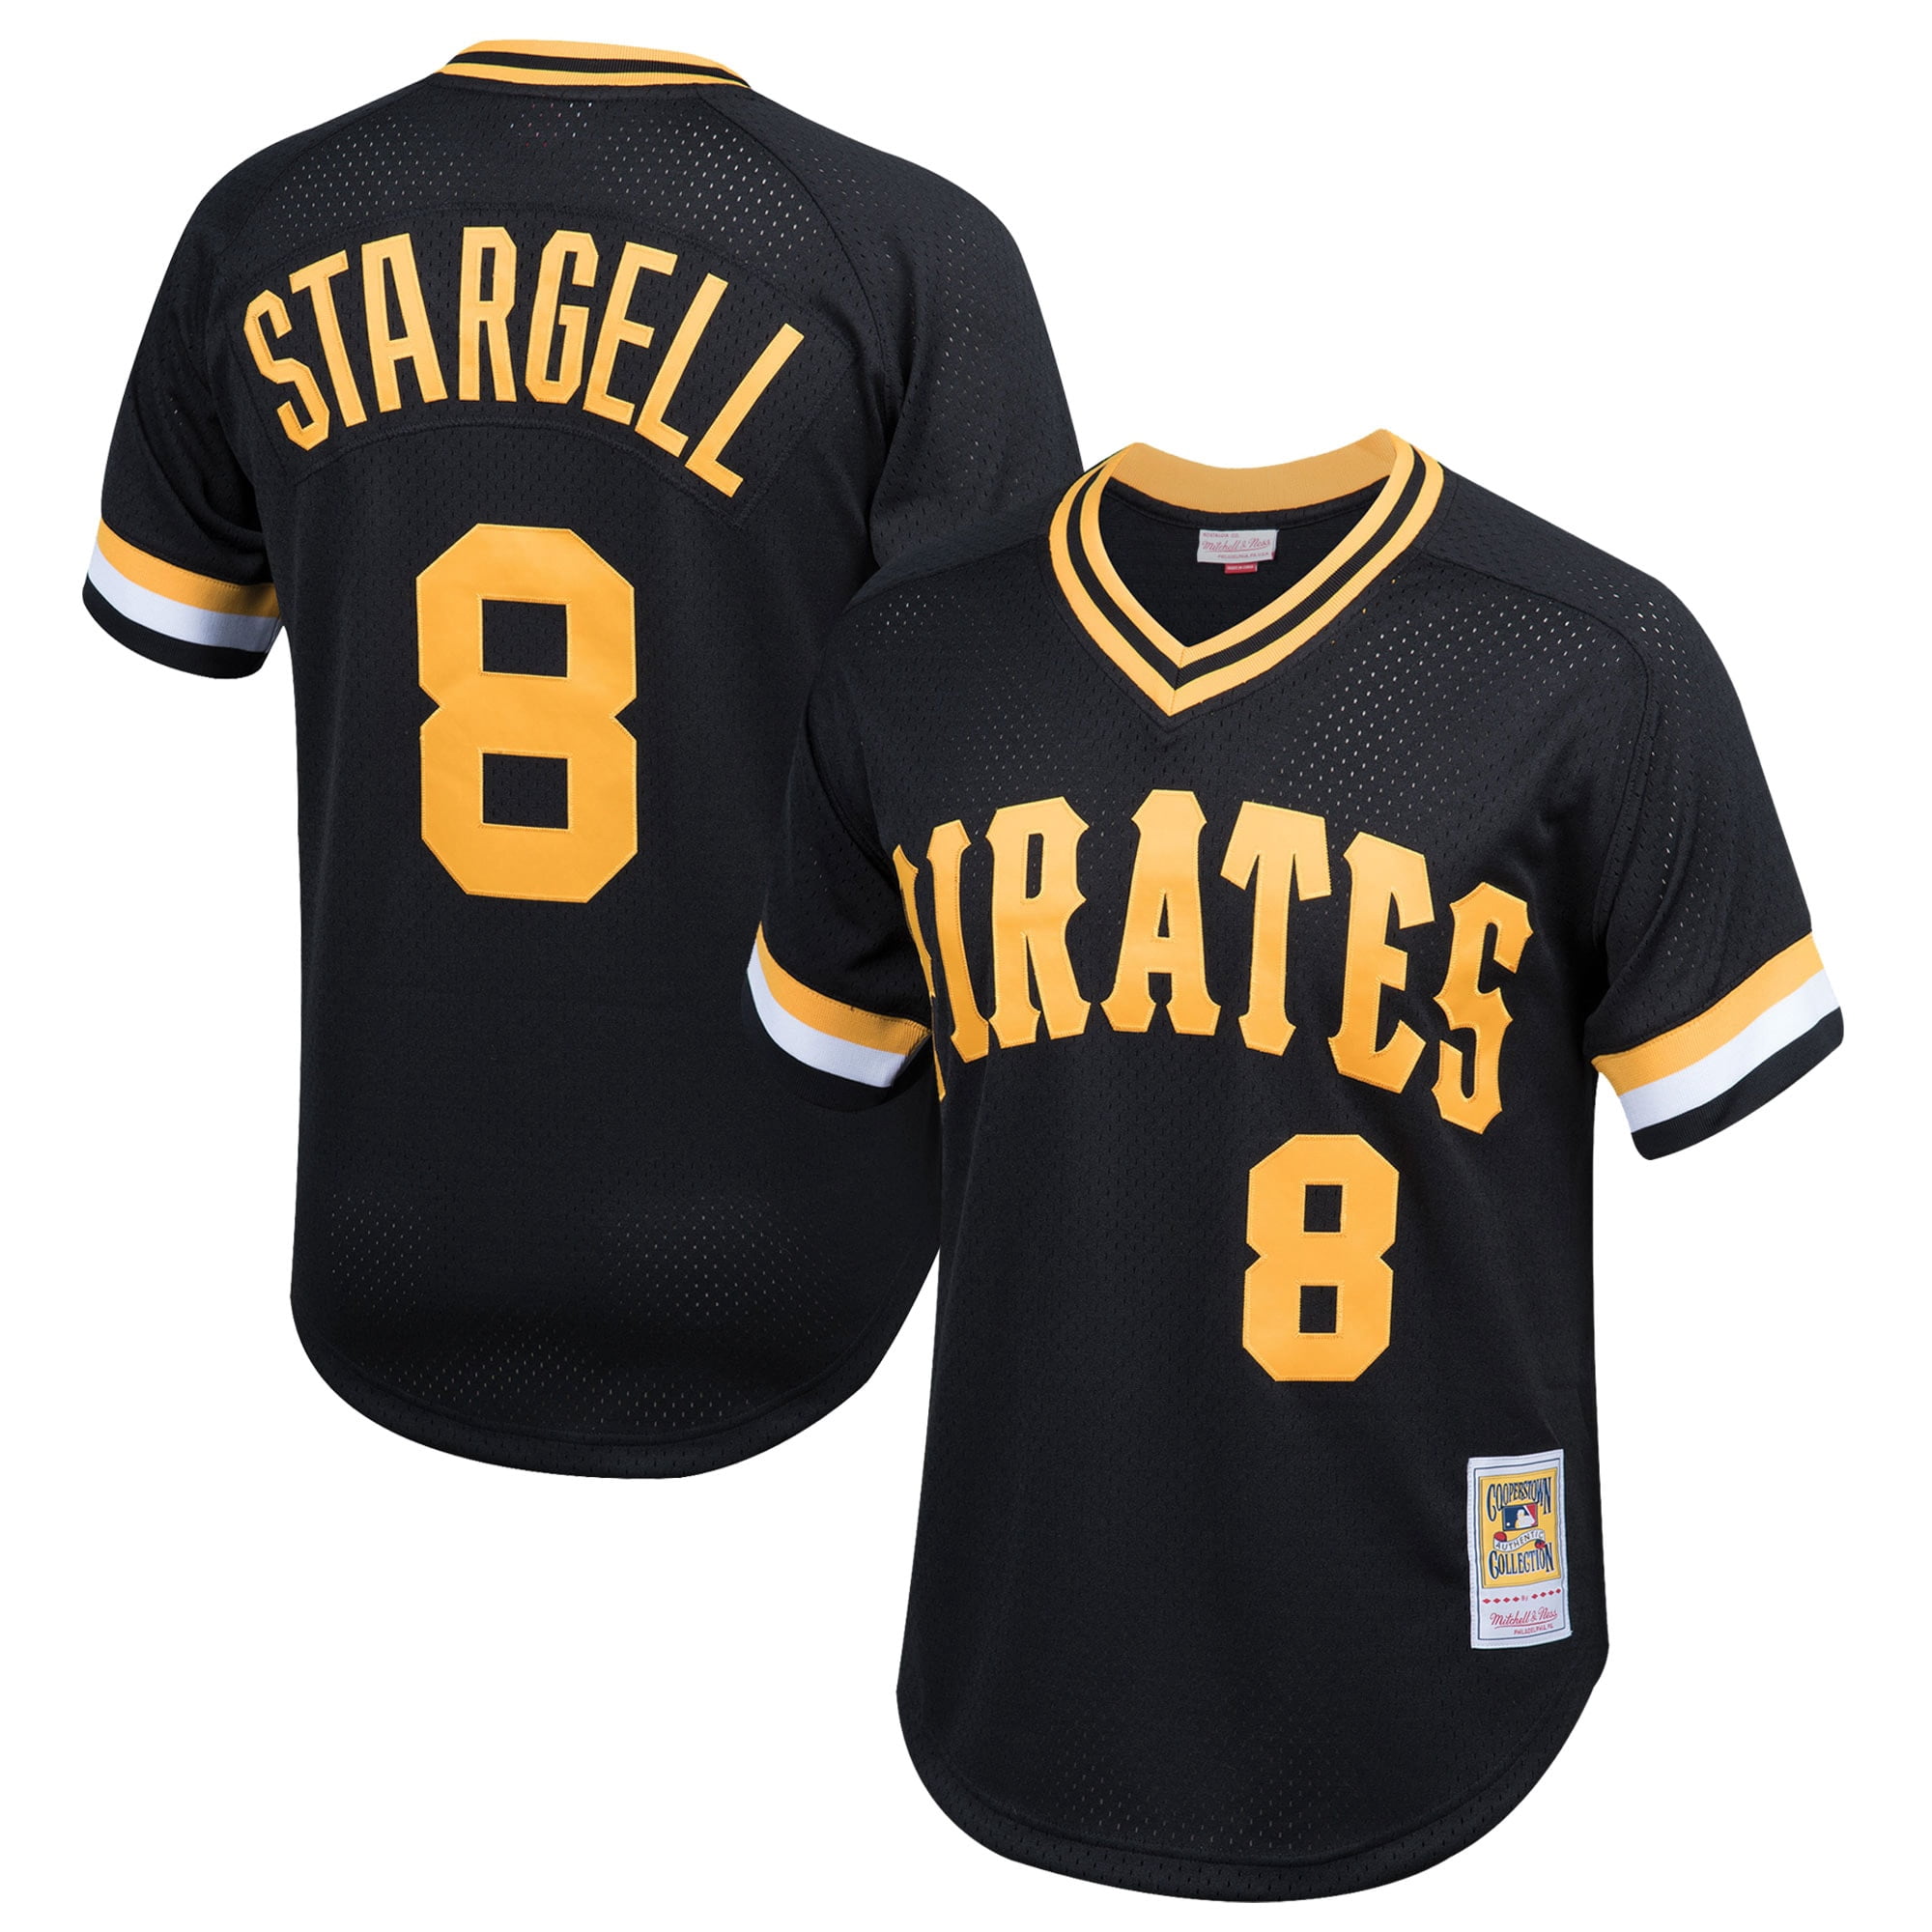 pirates authentic jersey